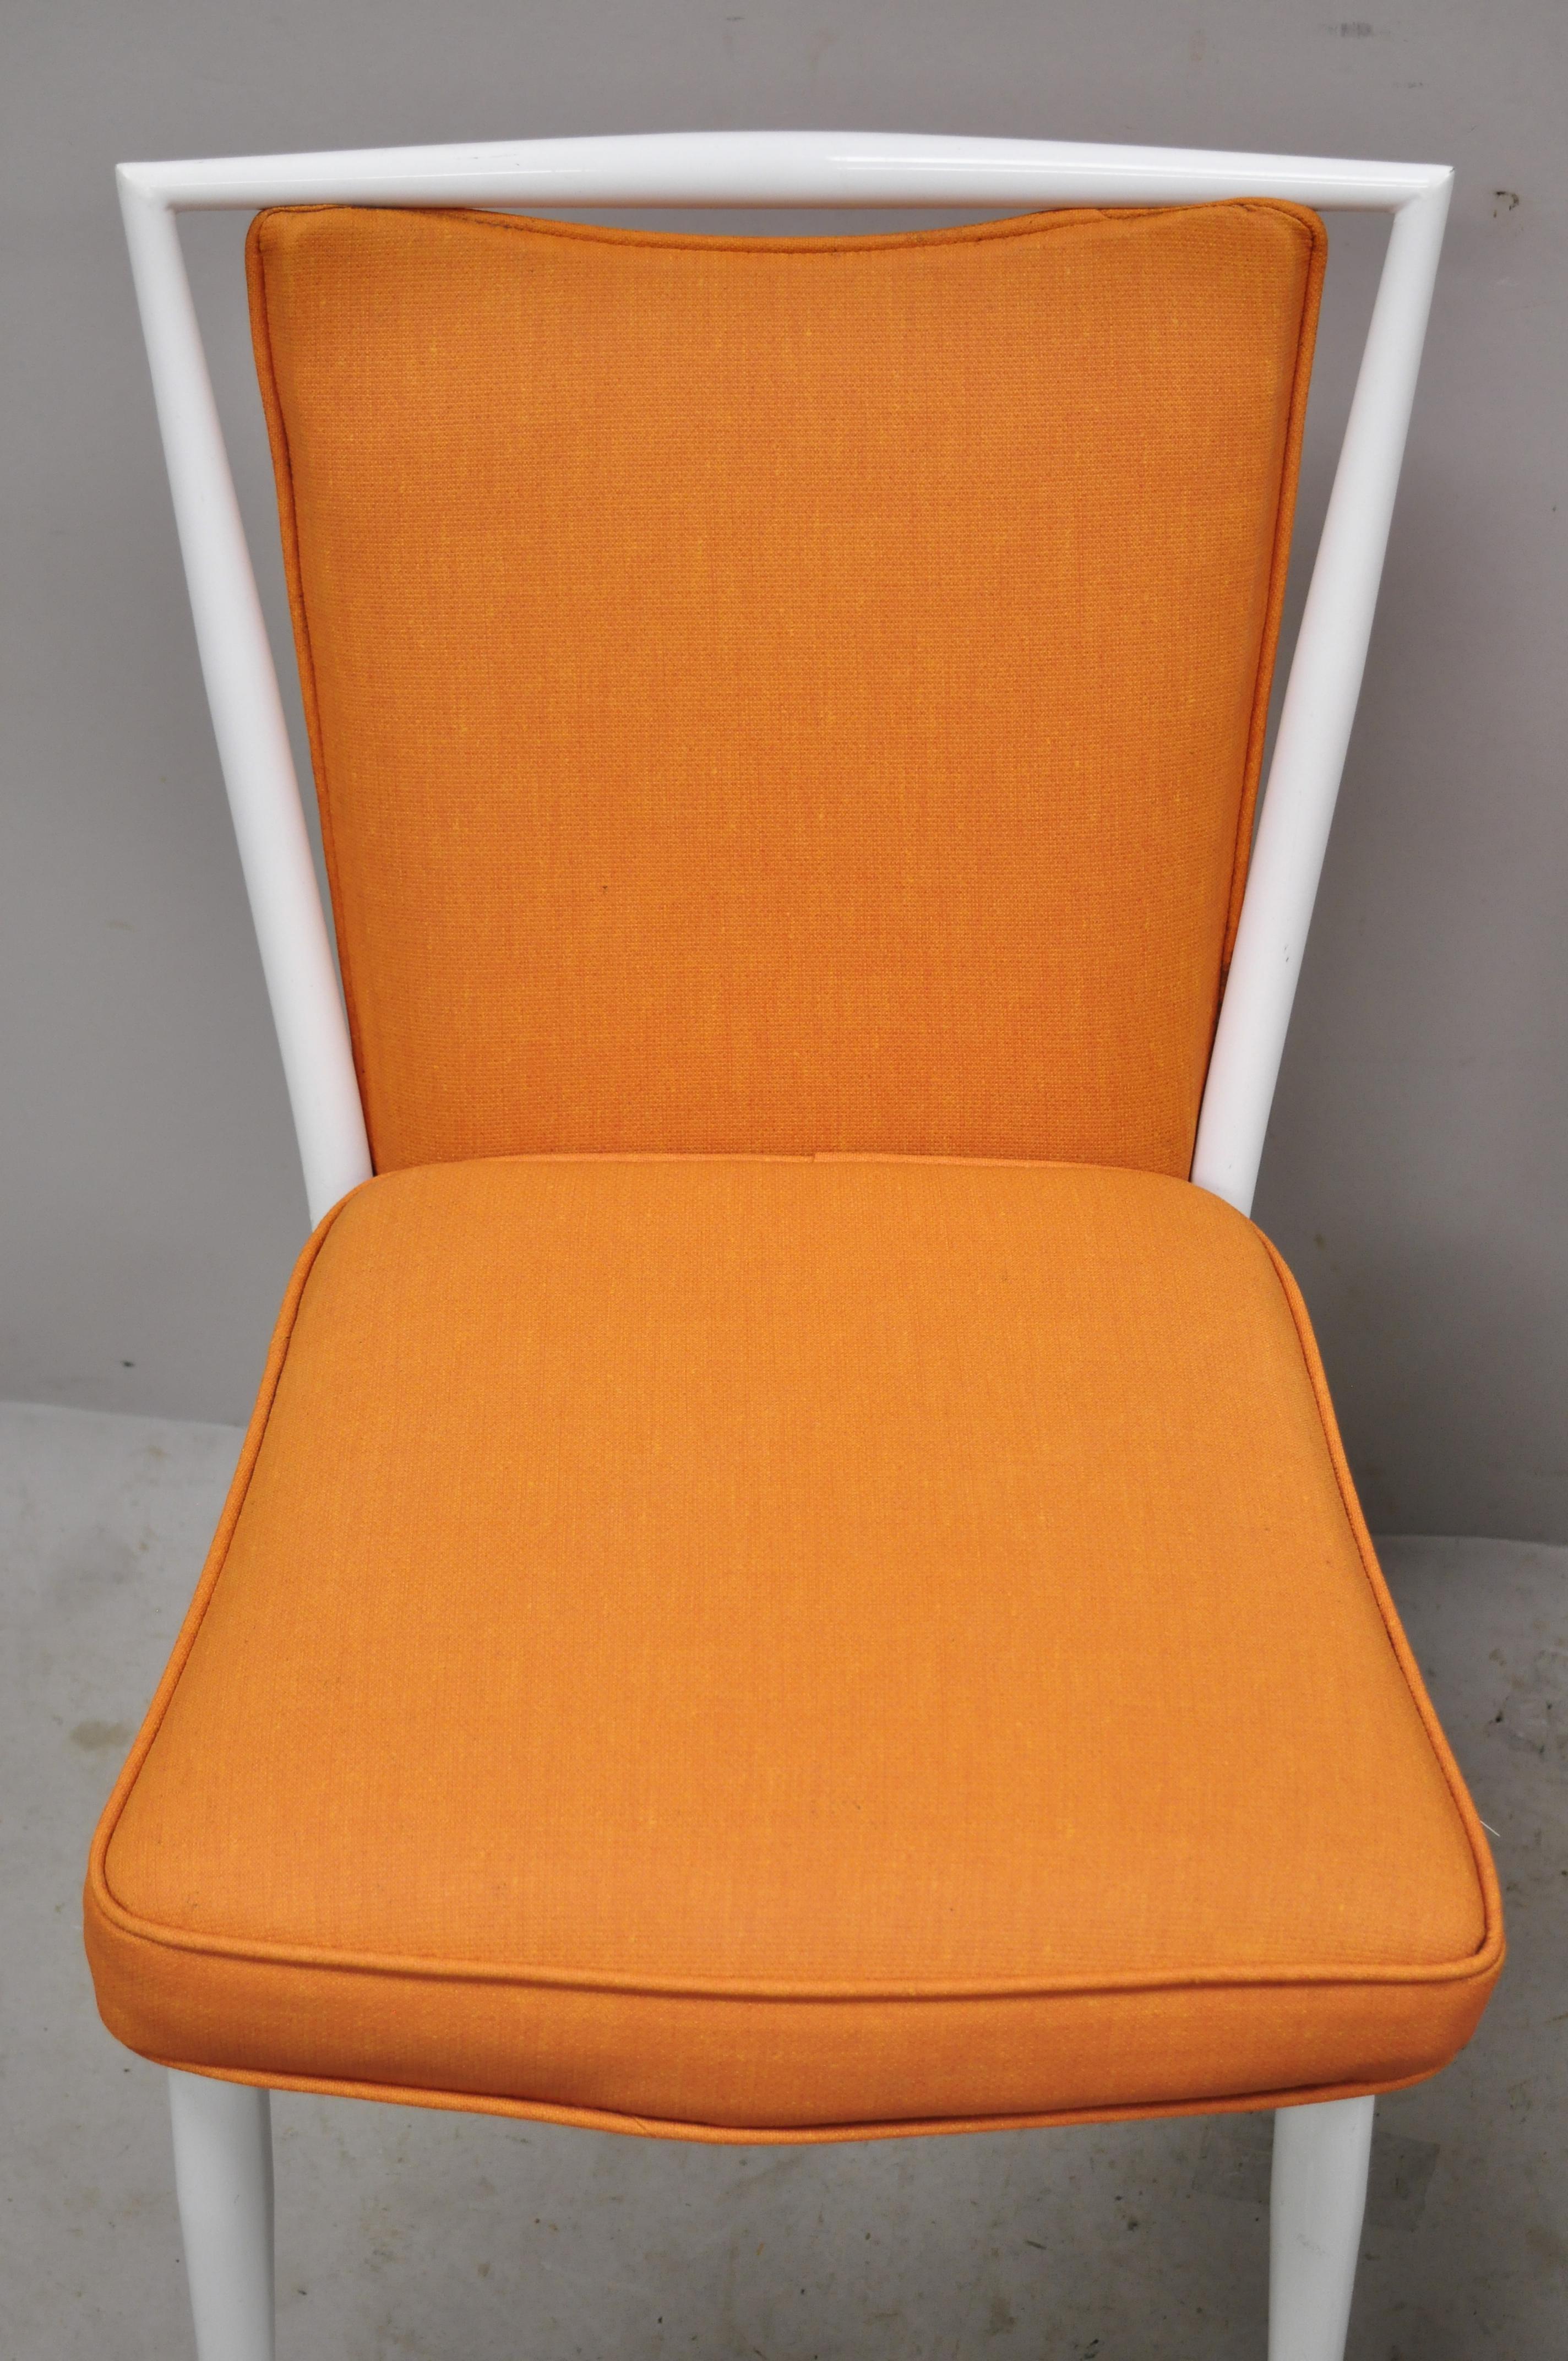 North American Mid Century White Enameled Steel Metal Orange Fabric Dining Side Chairs, a Pair For Sale